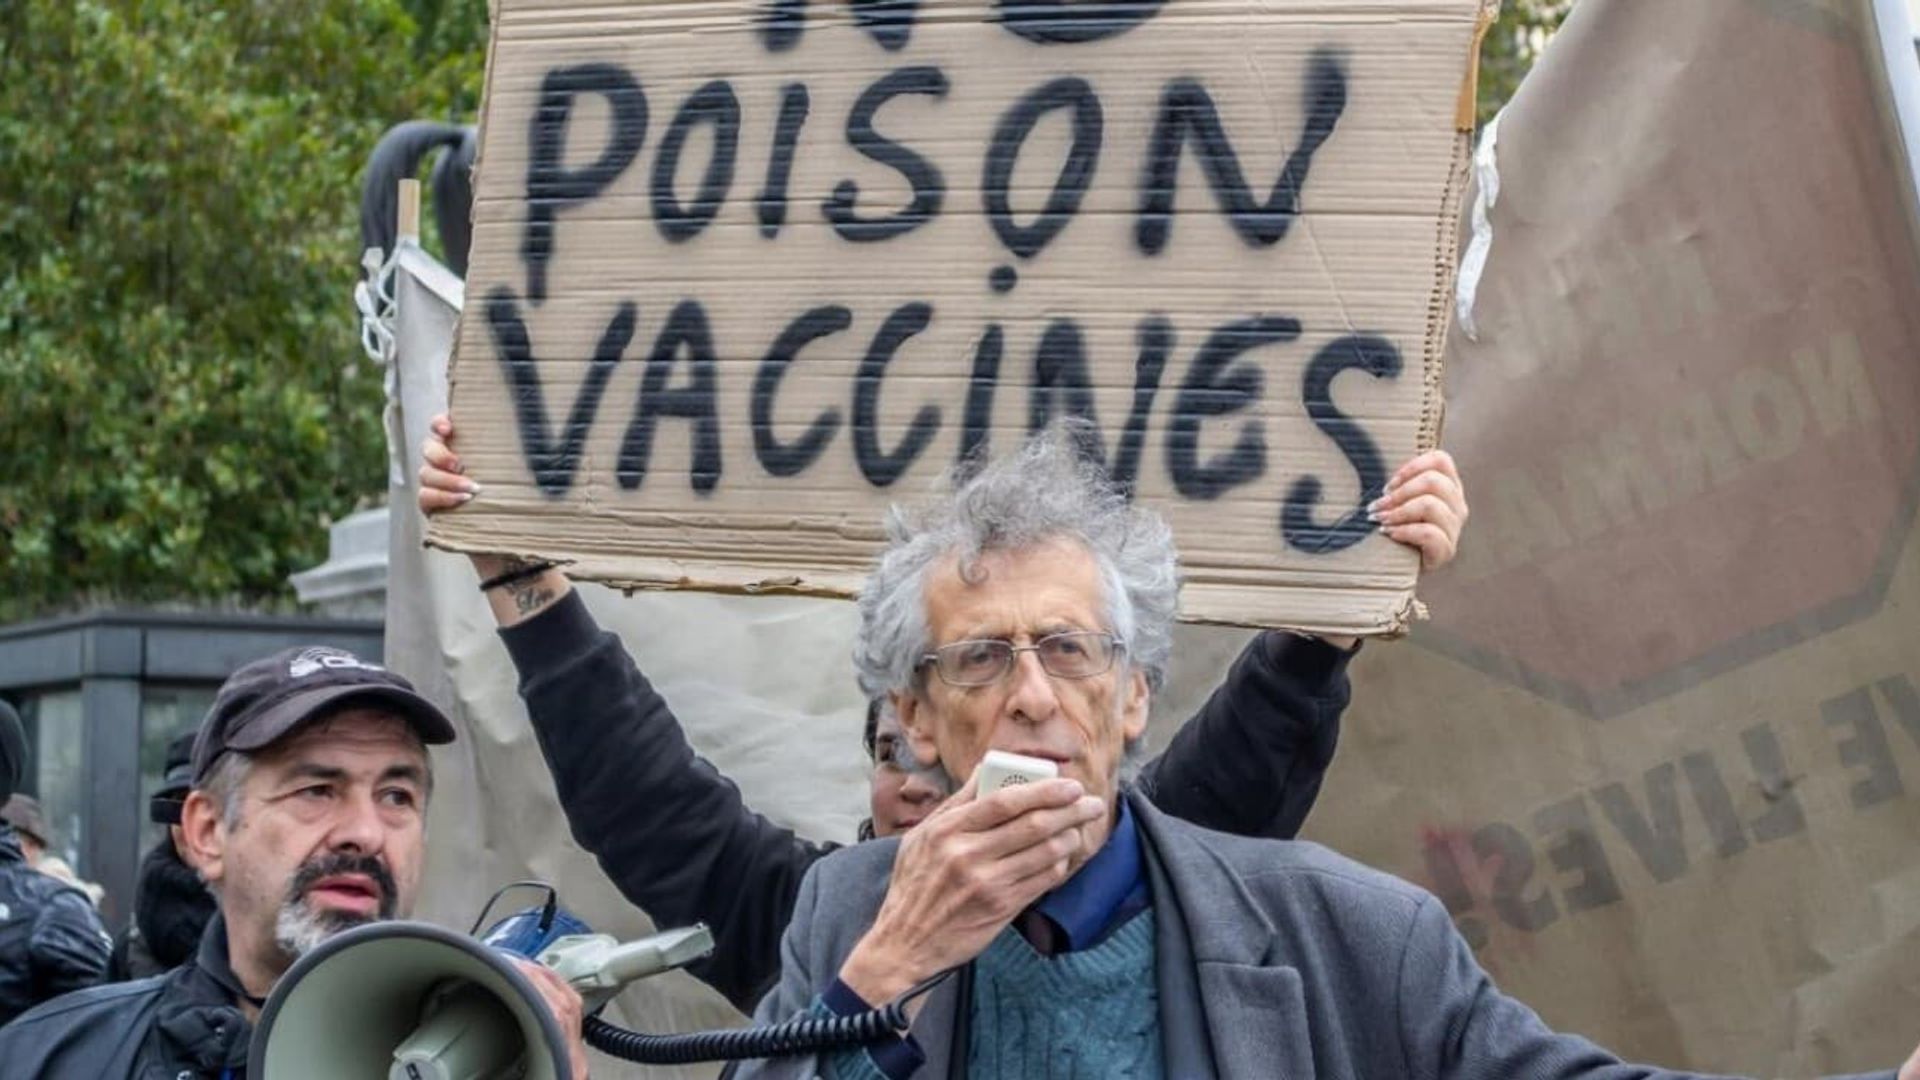 The Rise of the Anti-Vaxx Movement background